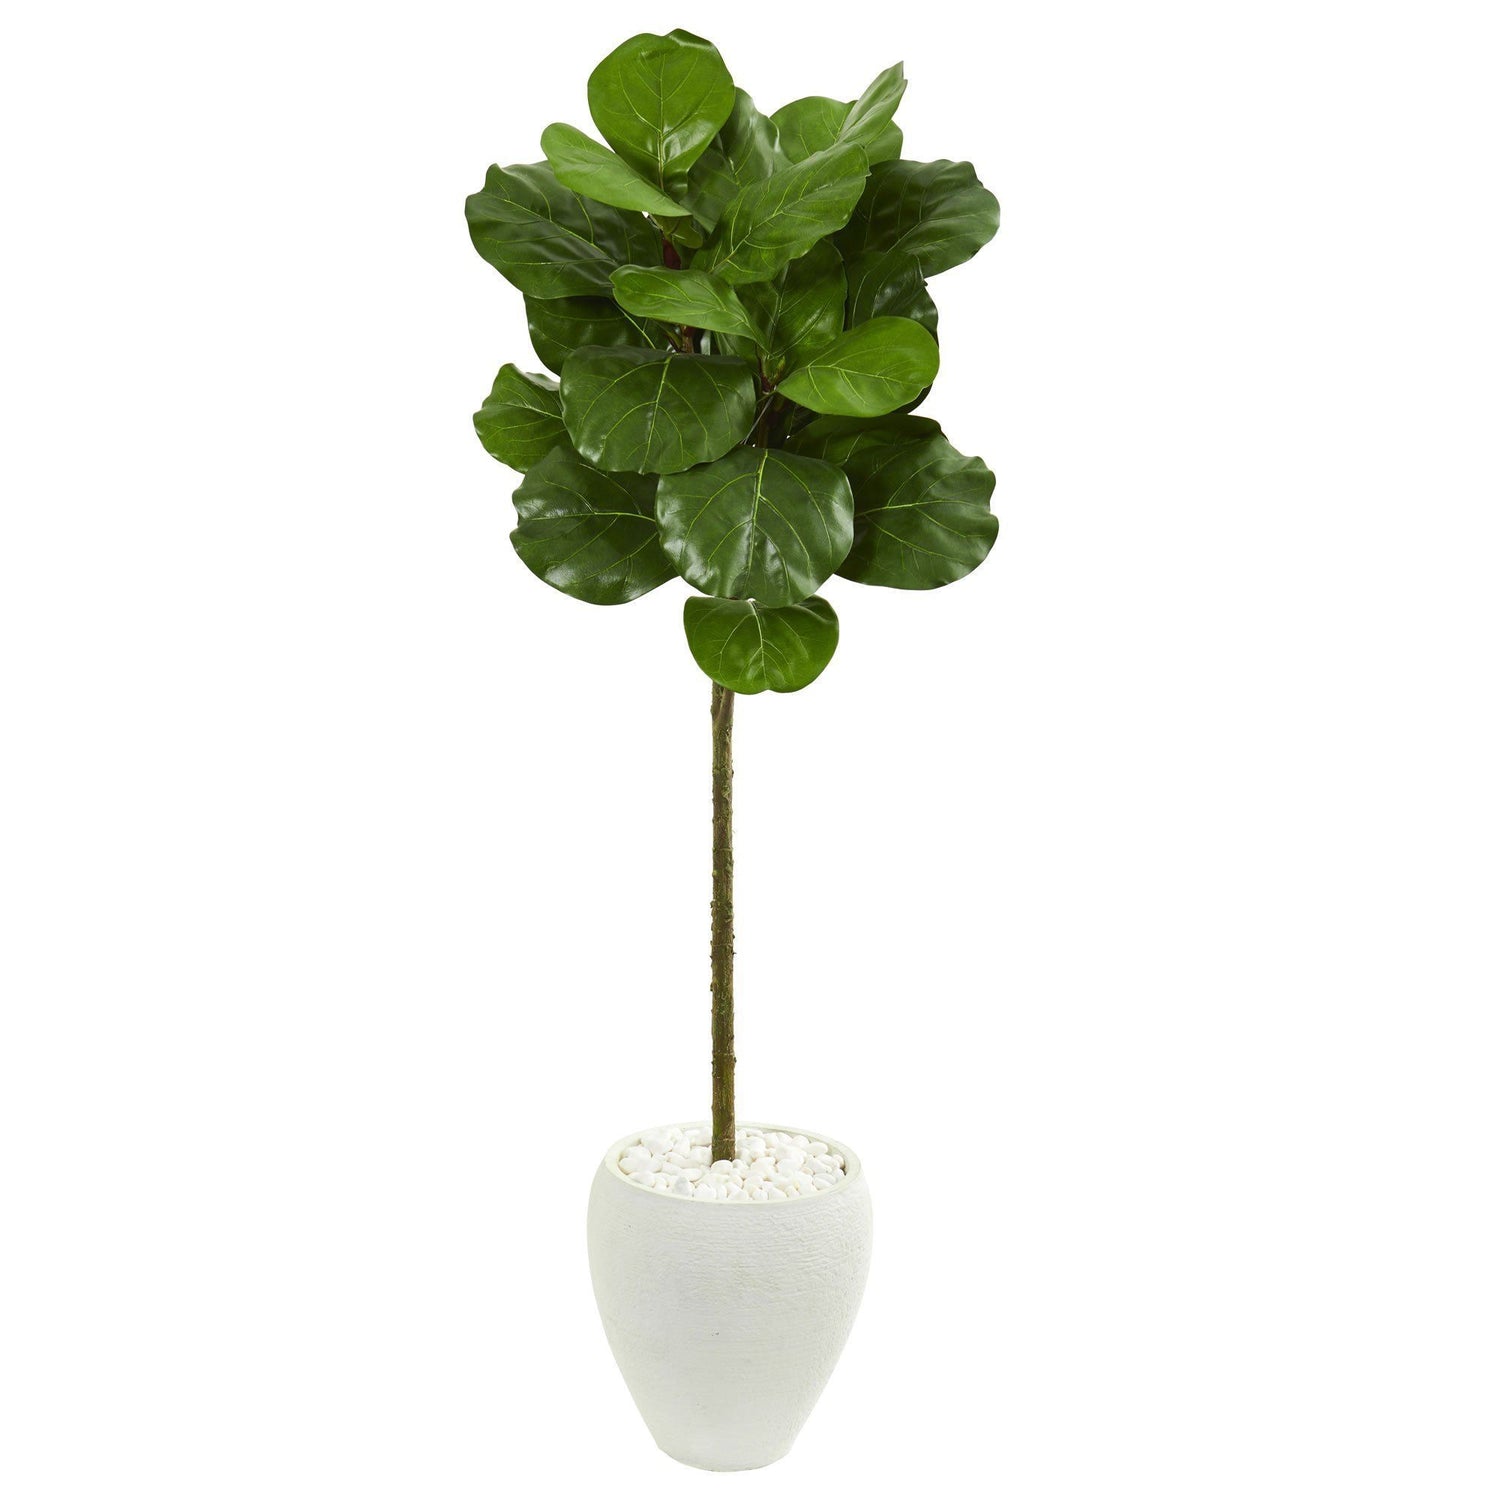 5’ Fiddle Leaf Artificial Tree in White Planter